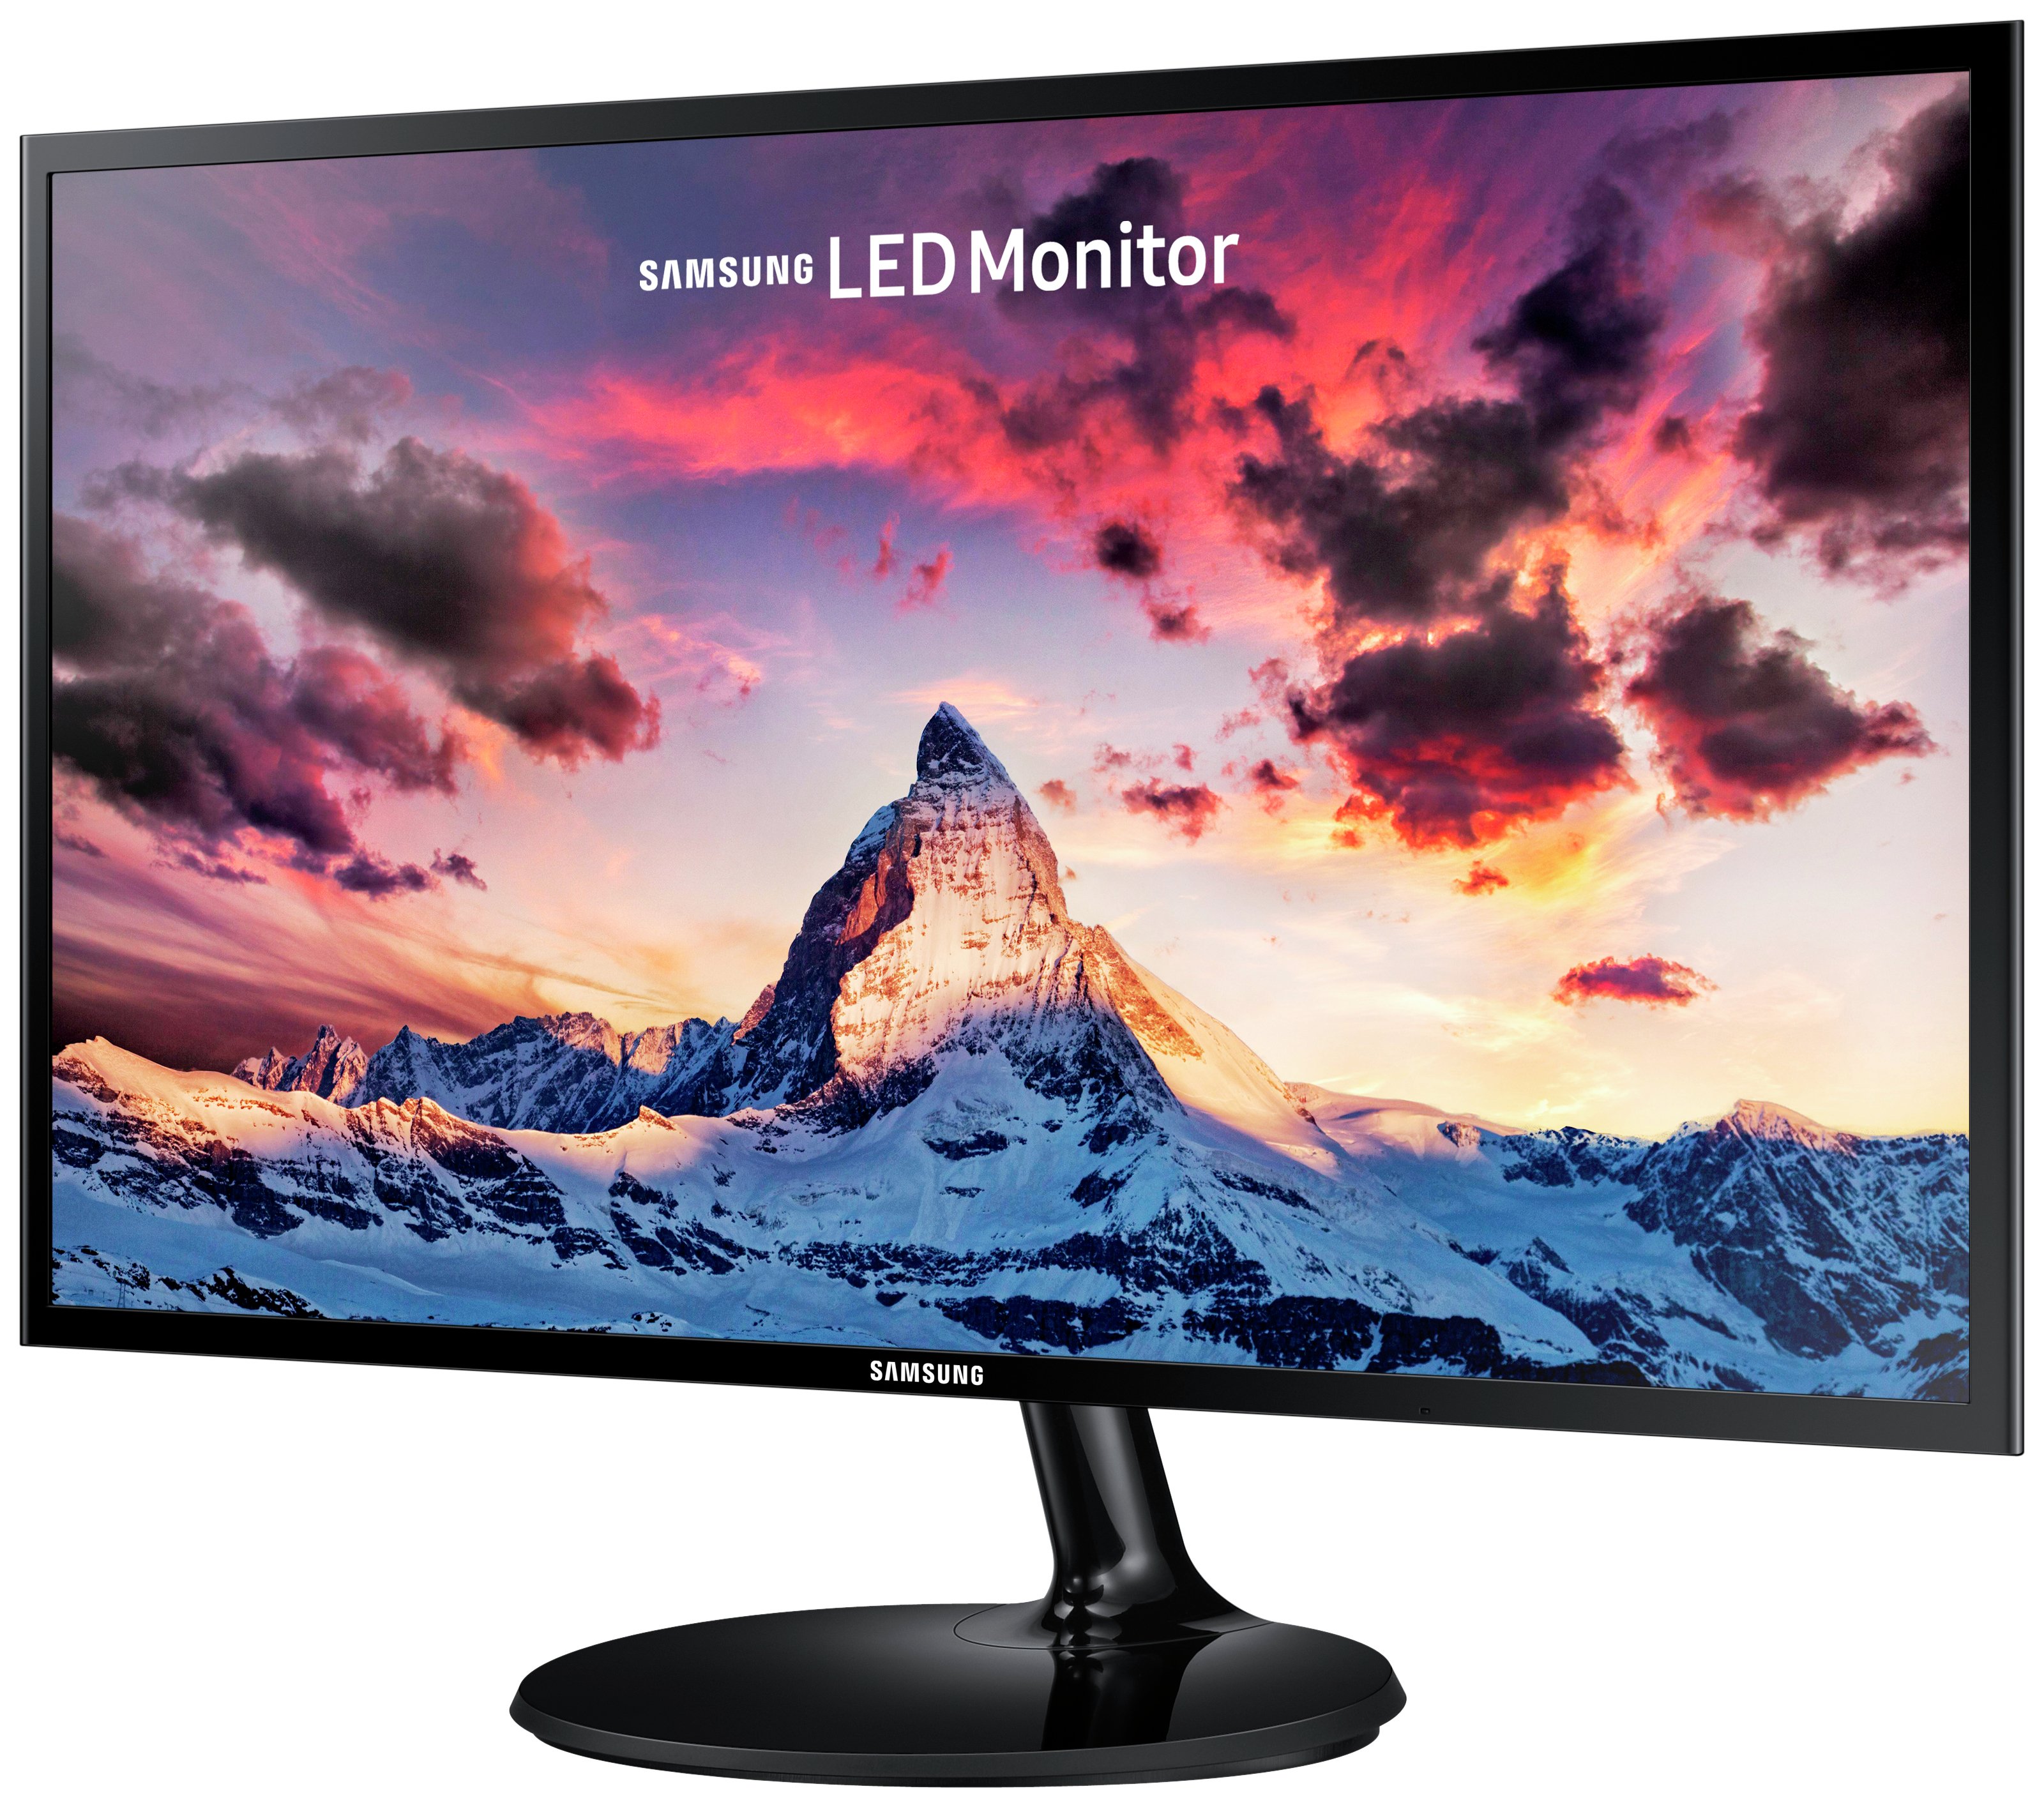 Samsung S24f352 24 Inch Led Monitor Reviews